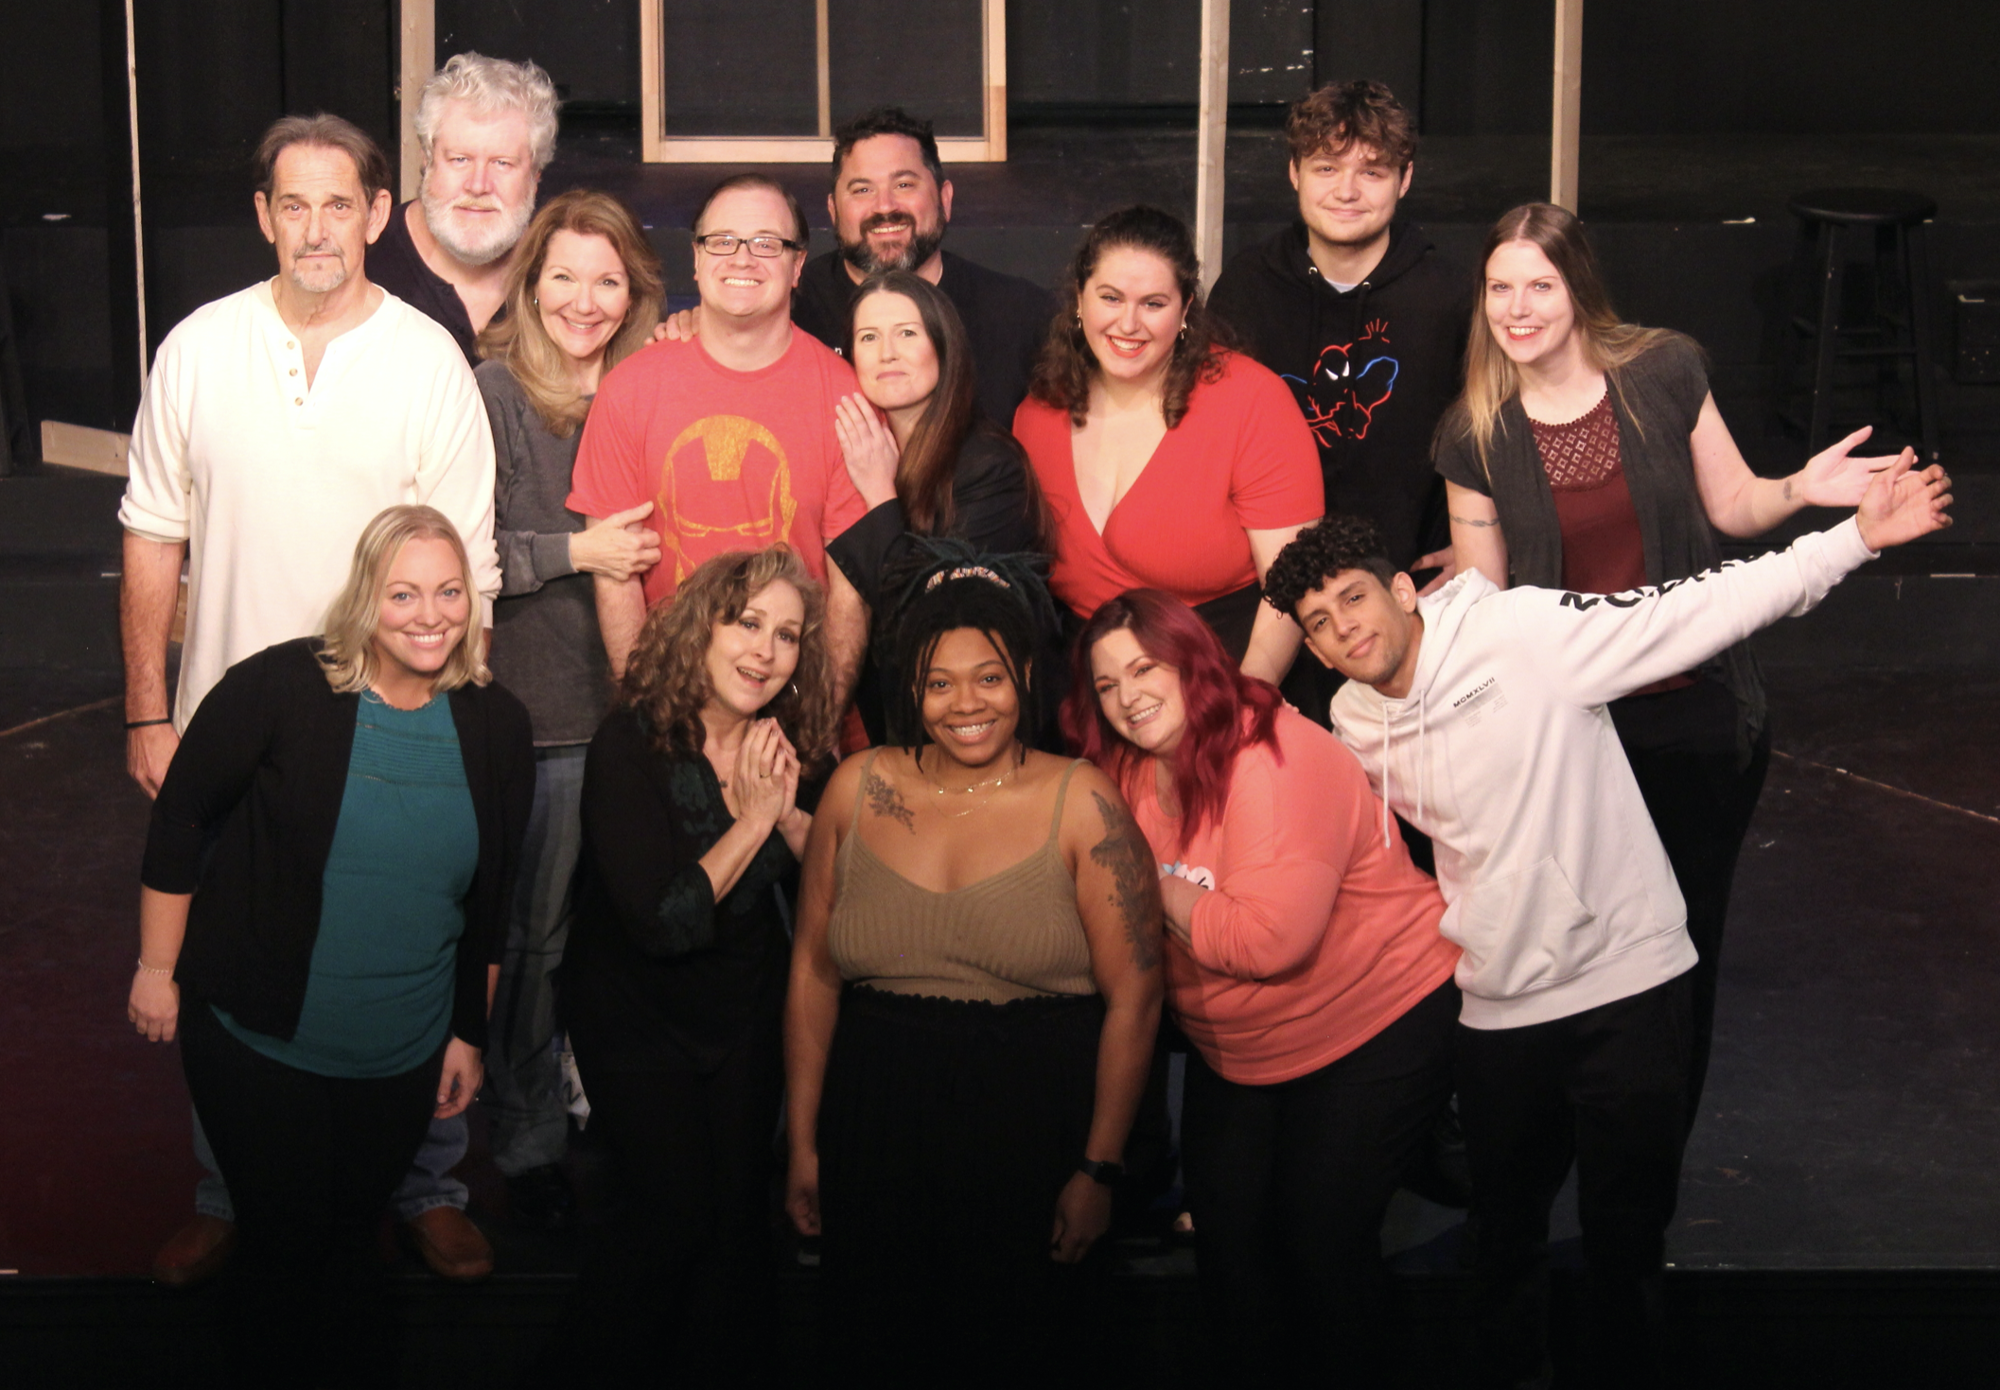 The cast: Manon Stonecypher, Diane Neighmond, Laniece Fagundes, Kelly Rivera, Nick Rodrigues, Peter Gutierrez, Rich Lacey, Michele O’Neil, Danno Waddell, Andrew Trotter, Junine Johnson, Jen Chidekel, Ethan Fink, April Whaley.